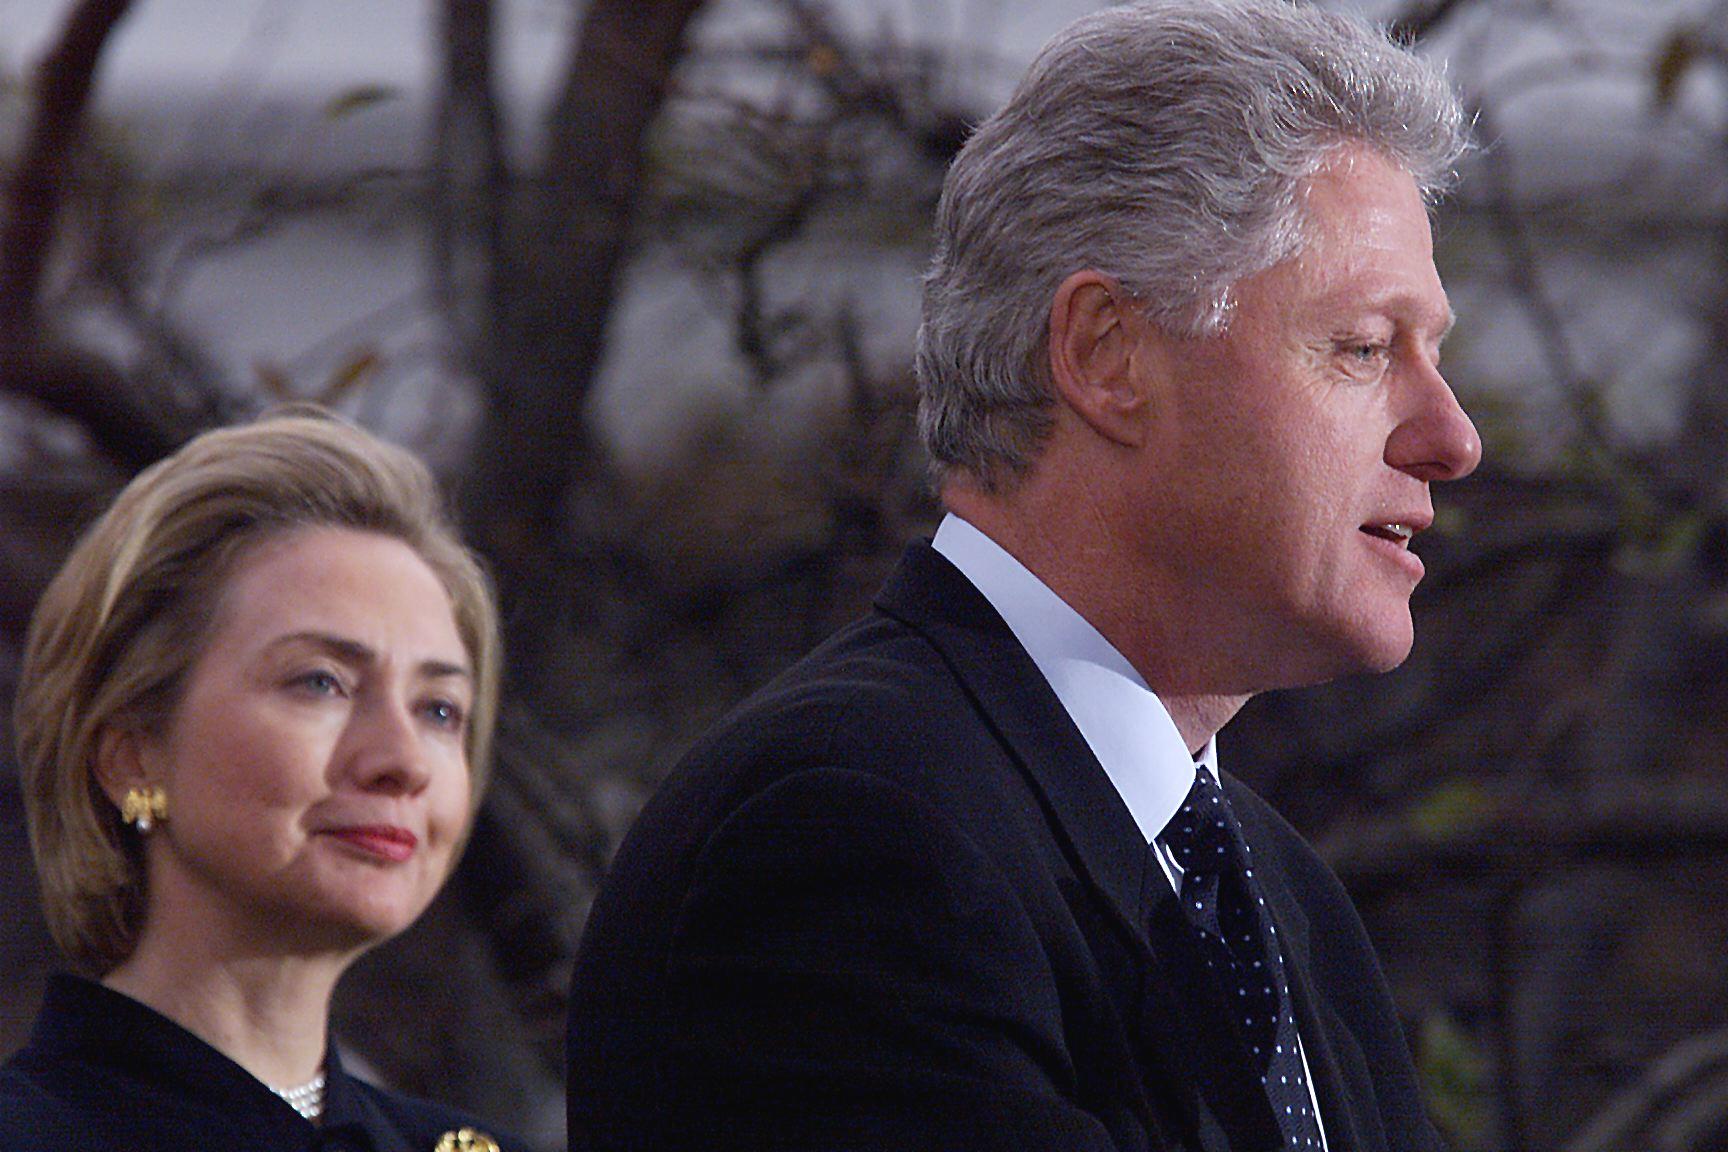 President Bill Clinton (R) appears with First Lady Hillary Clinton to make a statement to reporters outside the oval office following his impeachment by the U.S. House of Representatives. (TIM SLOAN—AFP/Getty Images)